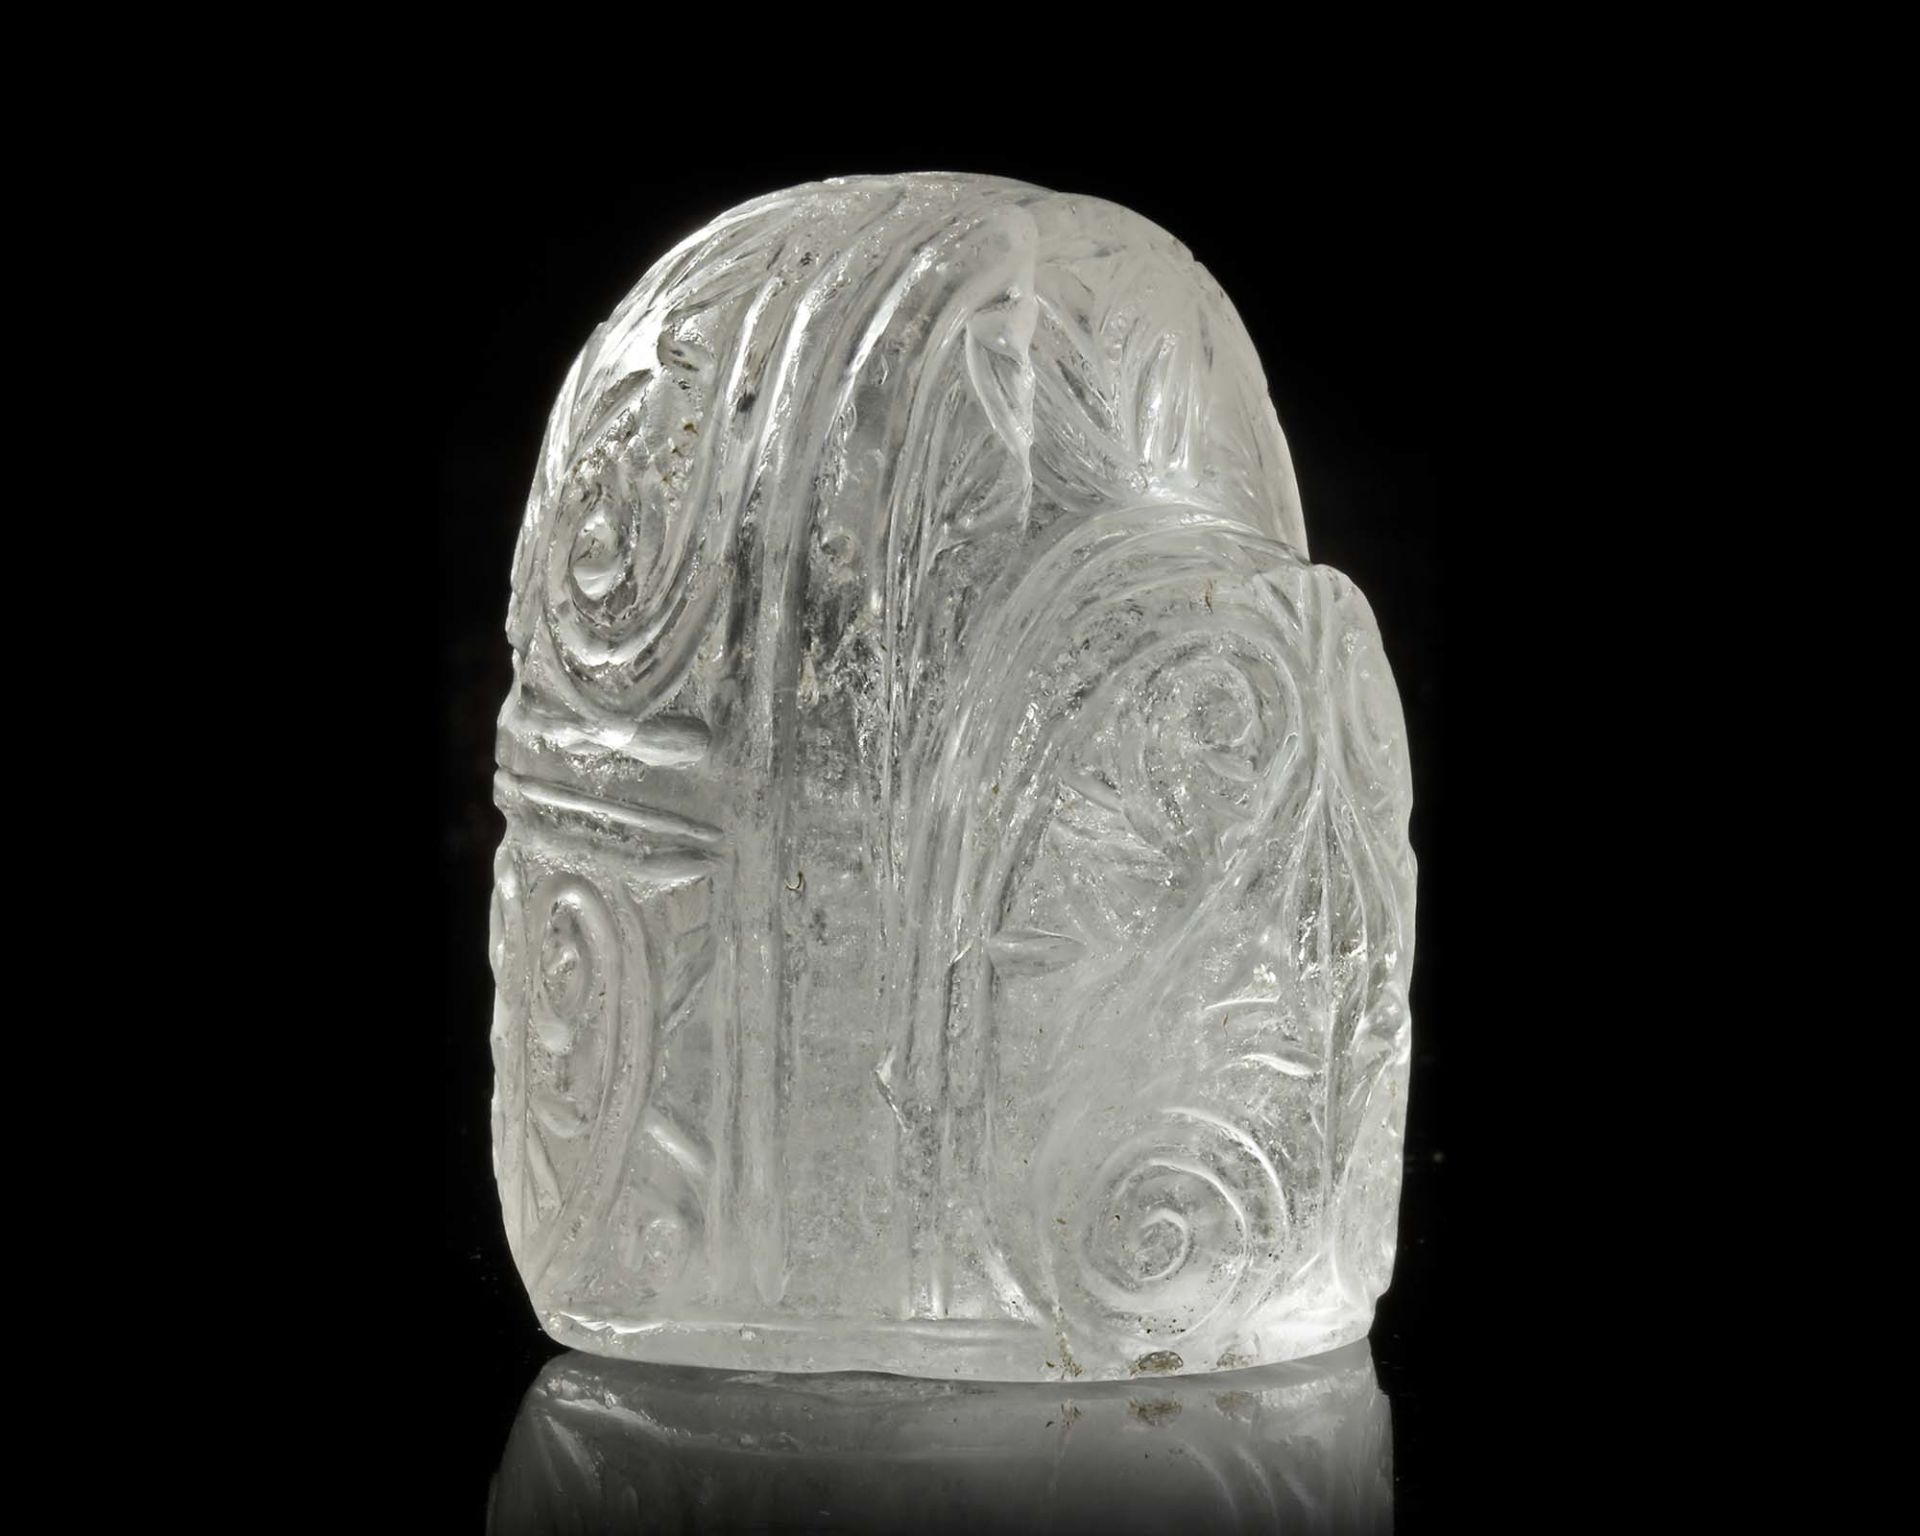 A KING (SHAH) ROCK CRYSTAL CHESS PIECE, IRAQ OR KHORASAN, LATE 9TH-EARLY 10TH CENTURY - Image 6 of 14